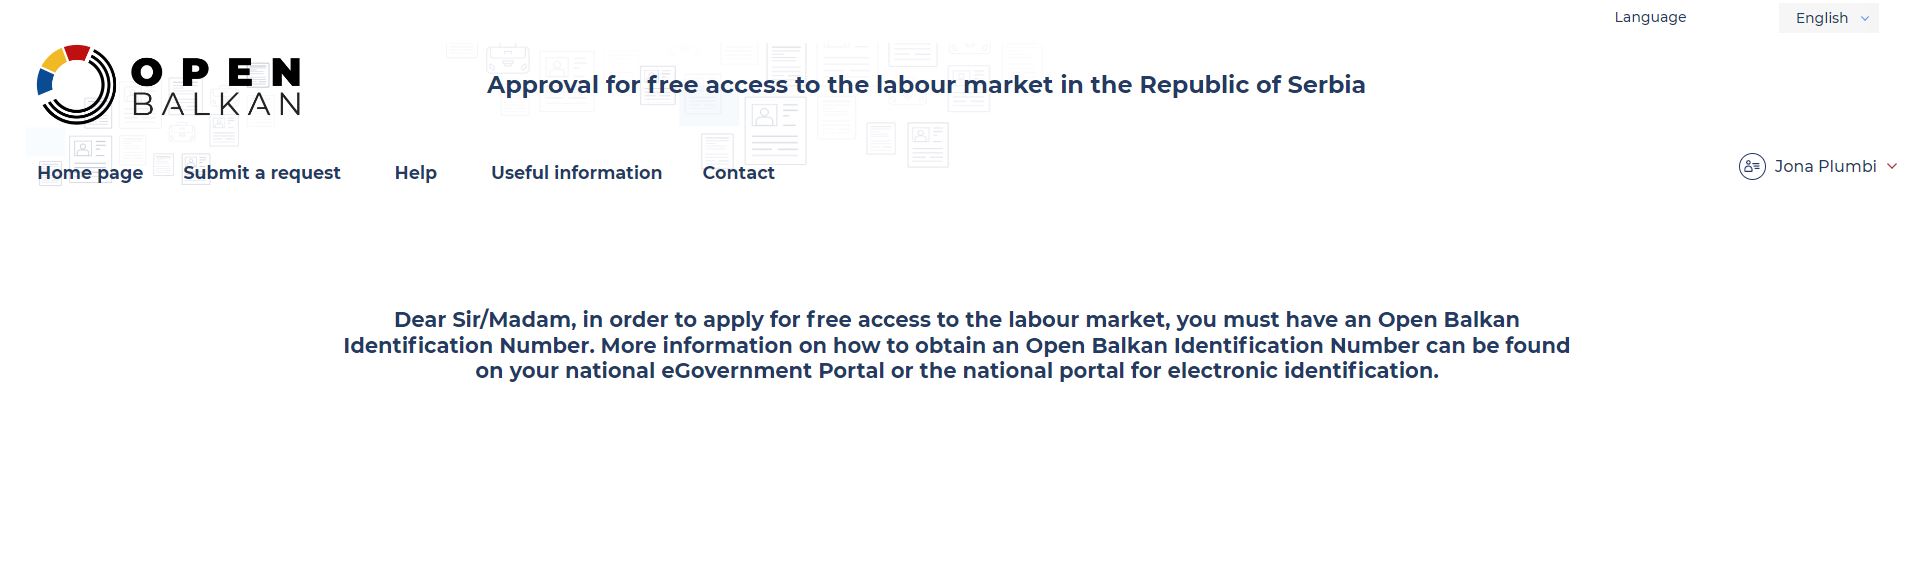 *The announcement on the Serbian government's website explicitly requests the Open Balkan ID for application to access the free labor market